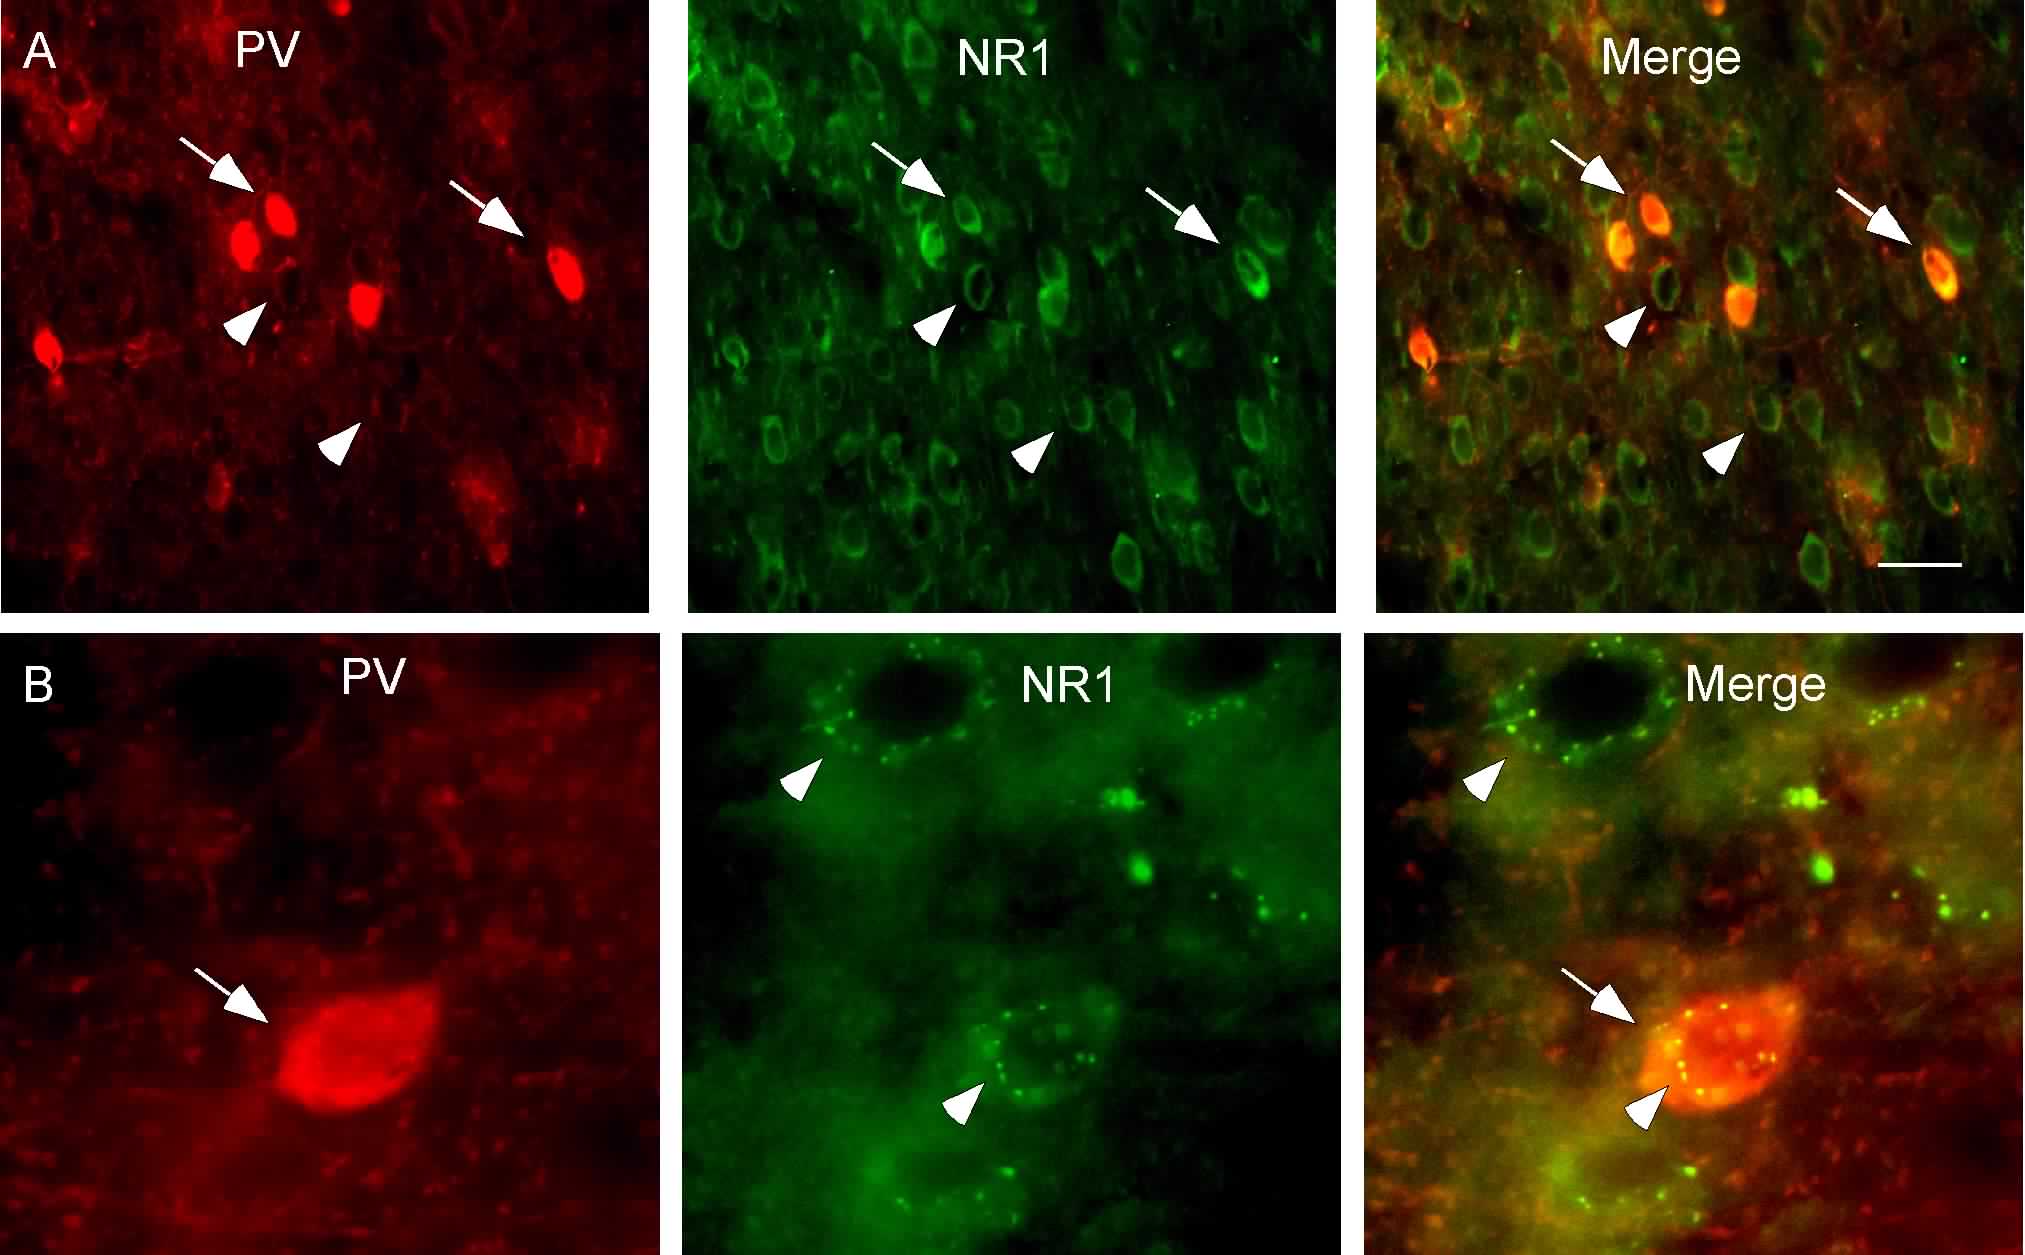 Double labeling of PV and NR1 subunits in the mPFC. PV, localized mainly in the fast-spiking interneurons in the neocortex, was labeled with Texas-Red (red) while NR1 was stained with FITC (green).